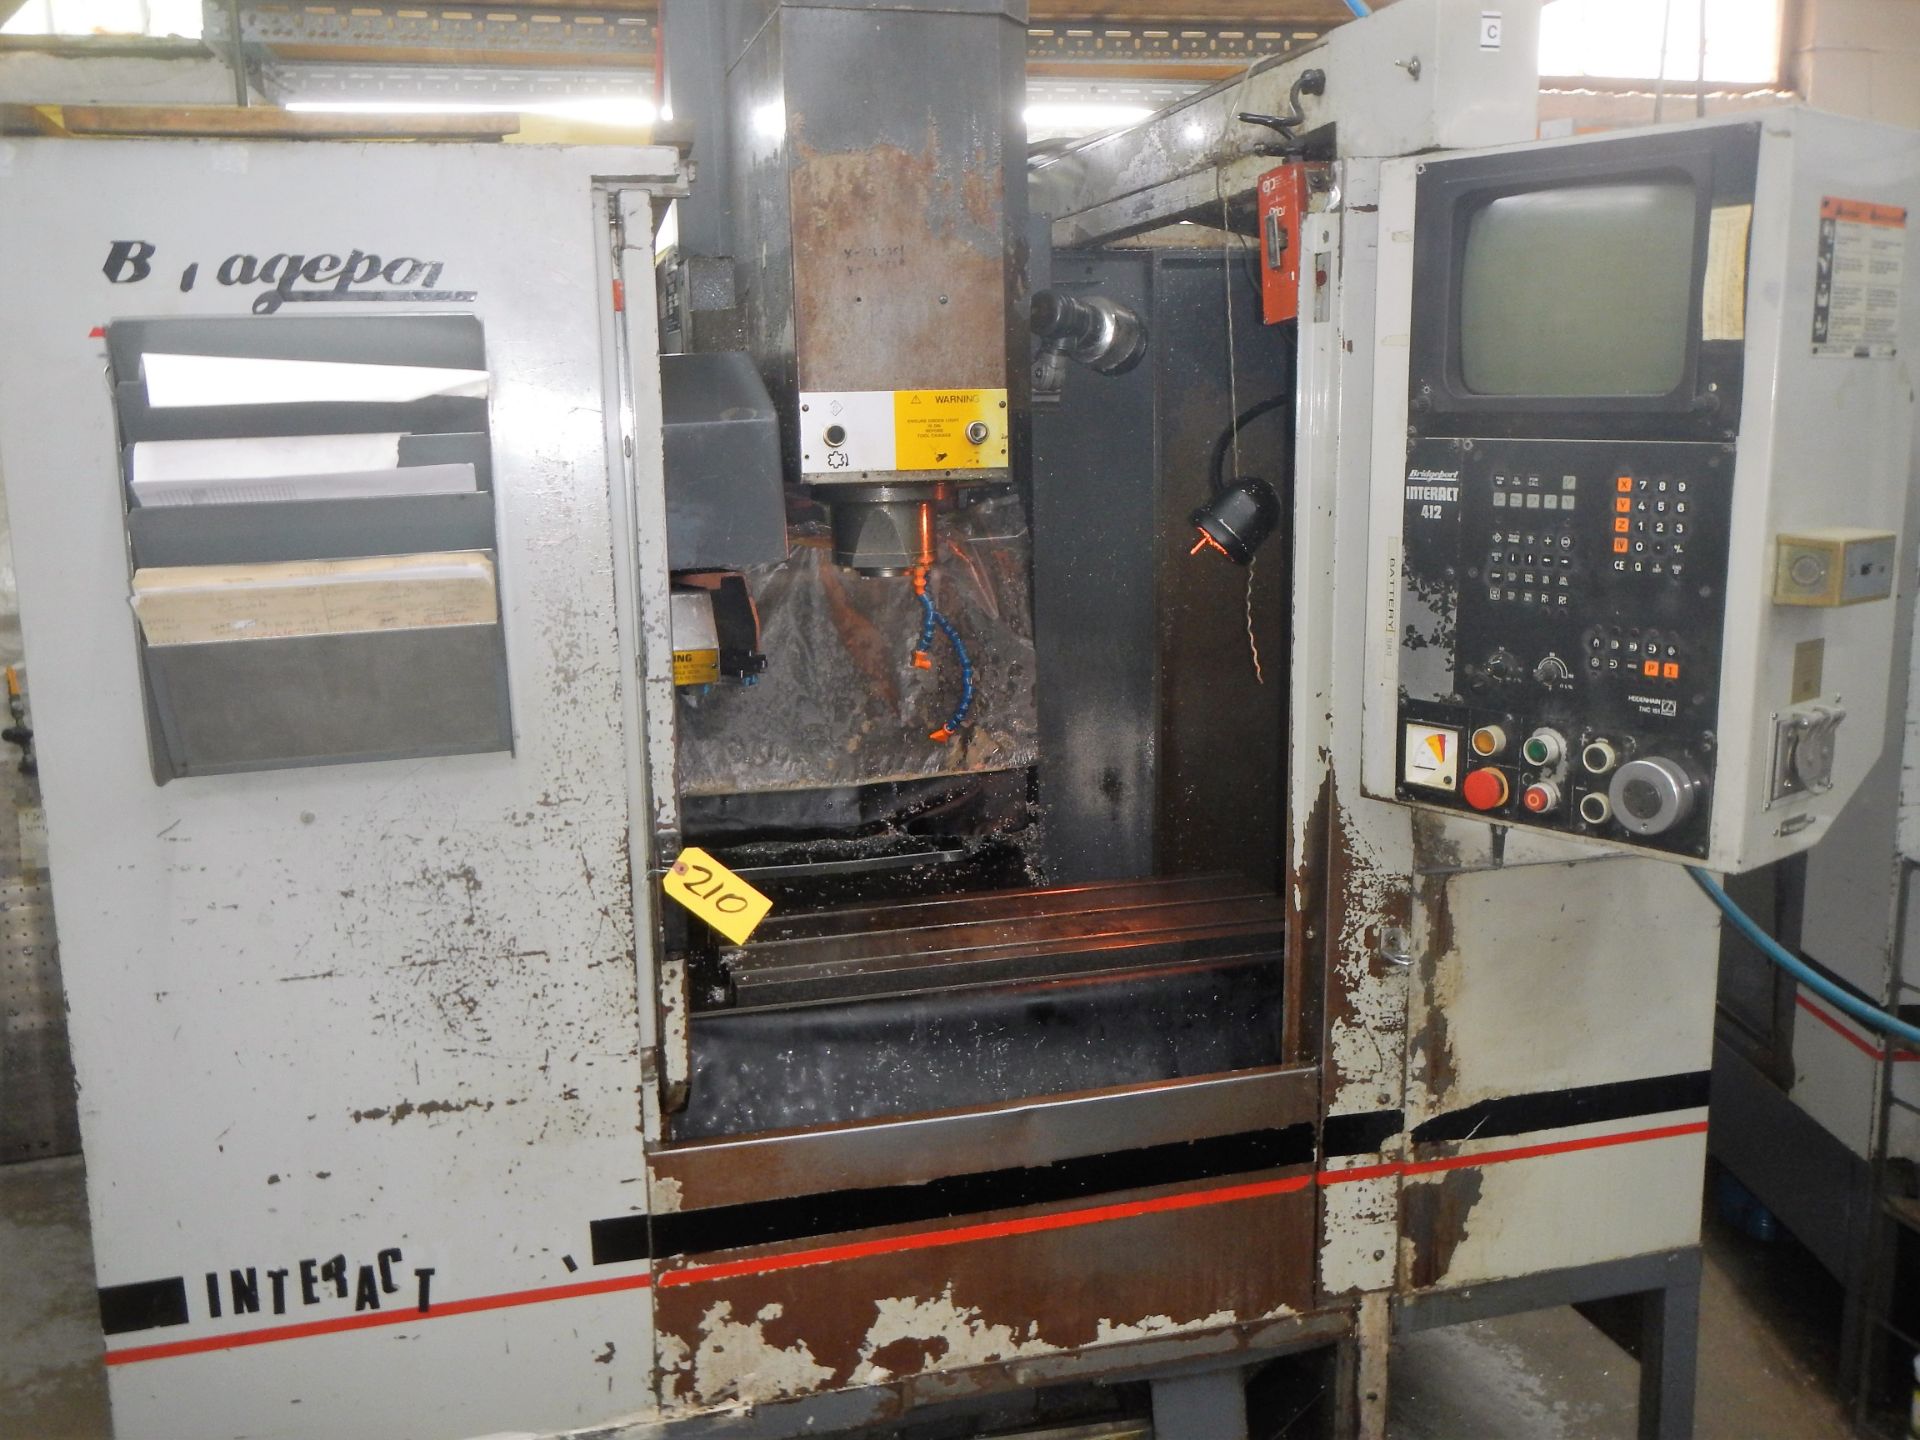 BRIDGEPORT MDL. INT-412V INTERACT CNC VERTICAL MACHINING CENTER, WITH BT-40 TAPER SPINDLE,